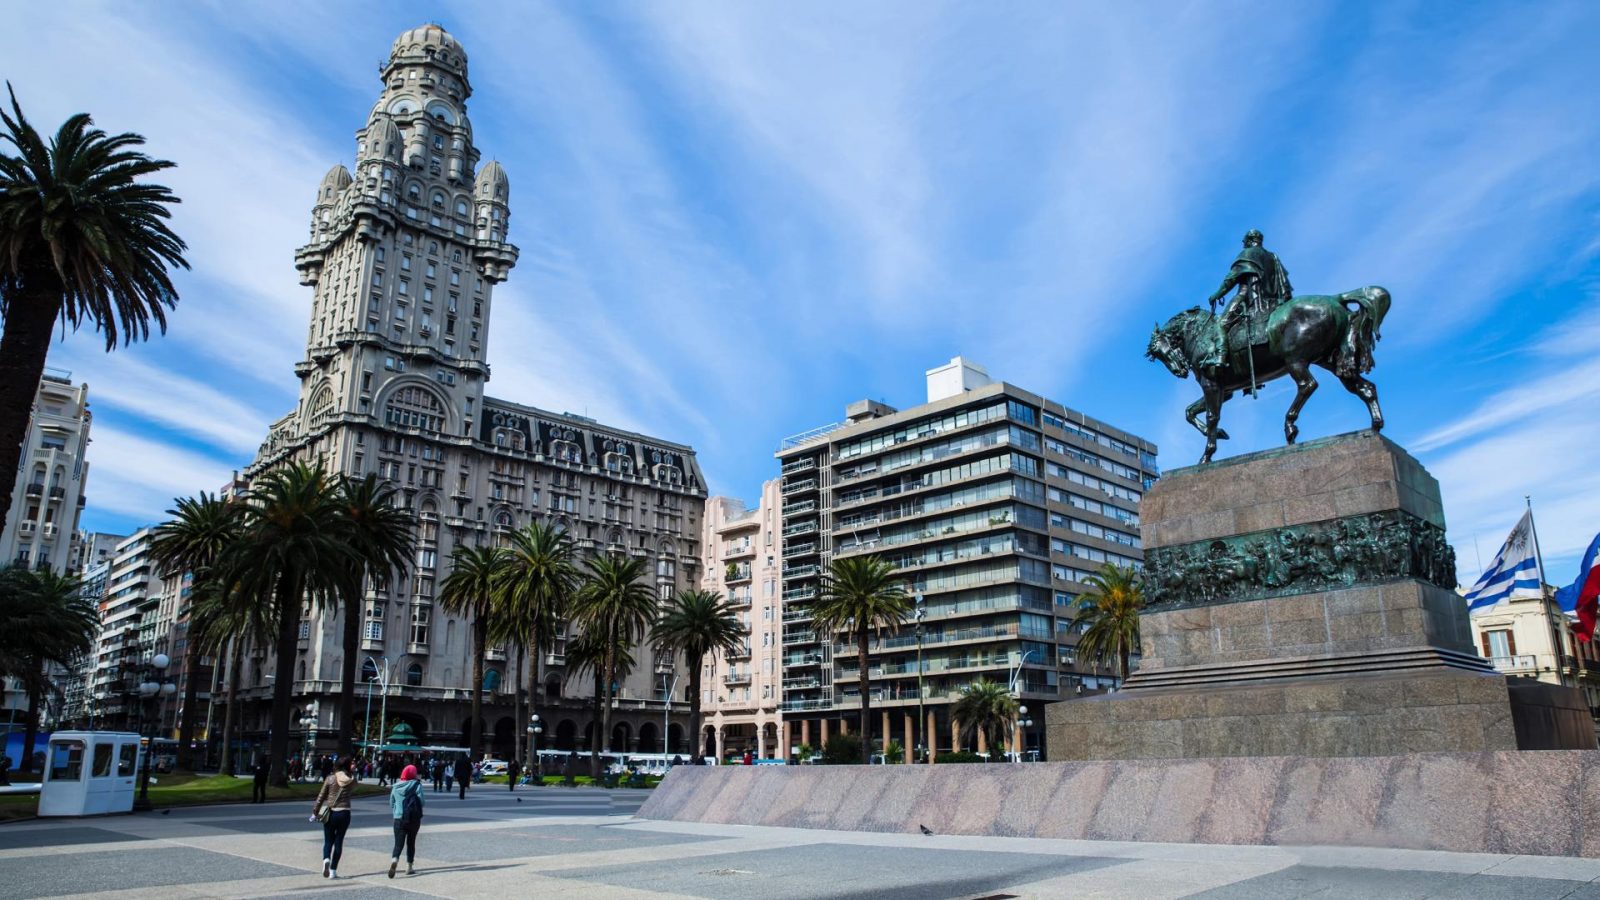 This City-Country Matching Quiz Gets Progressively Harder With Each Question – Can You Keep up With It? Plaza Independencia, Montevideo, Uruguay